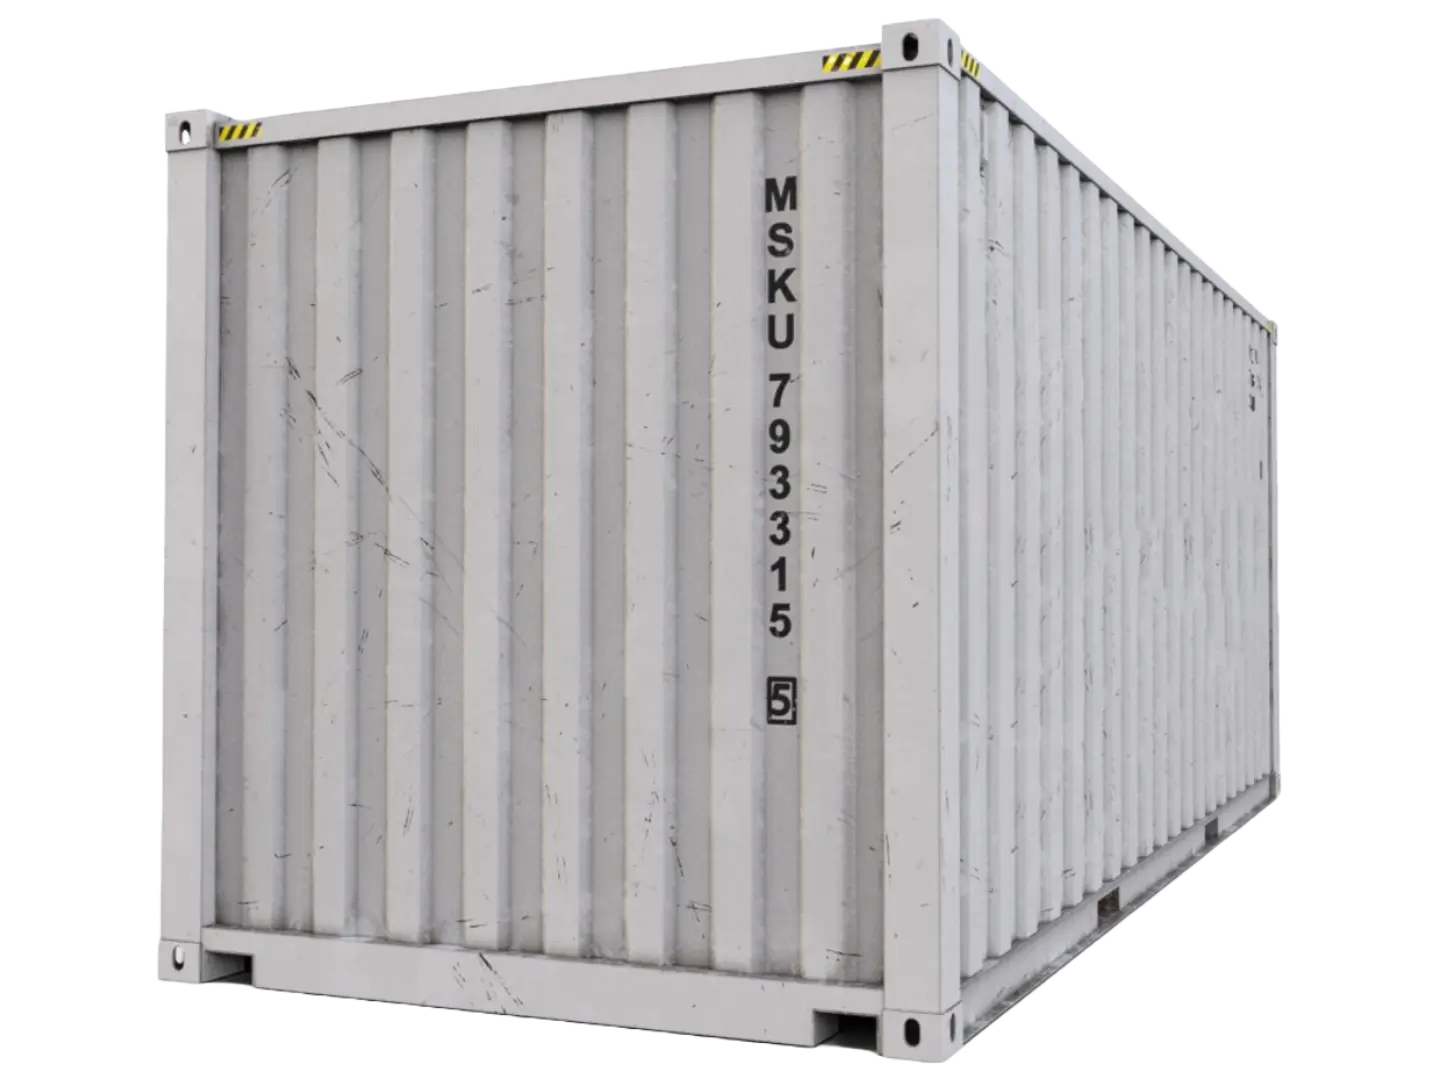 20ft standard shipping container rear view